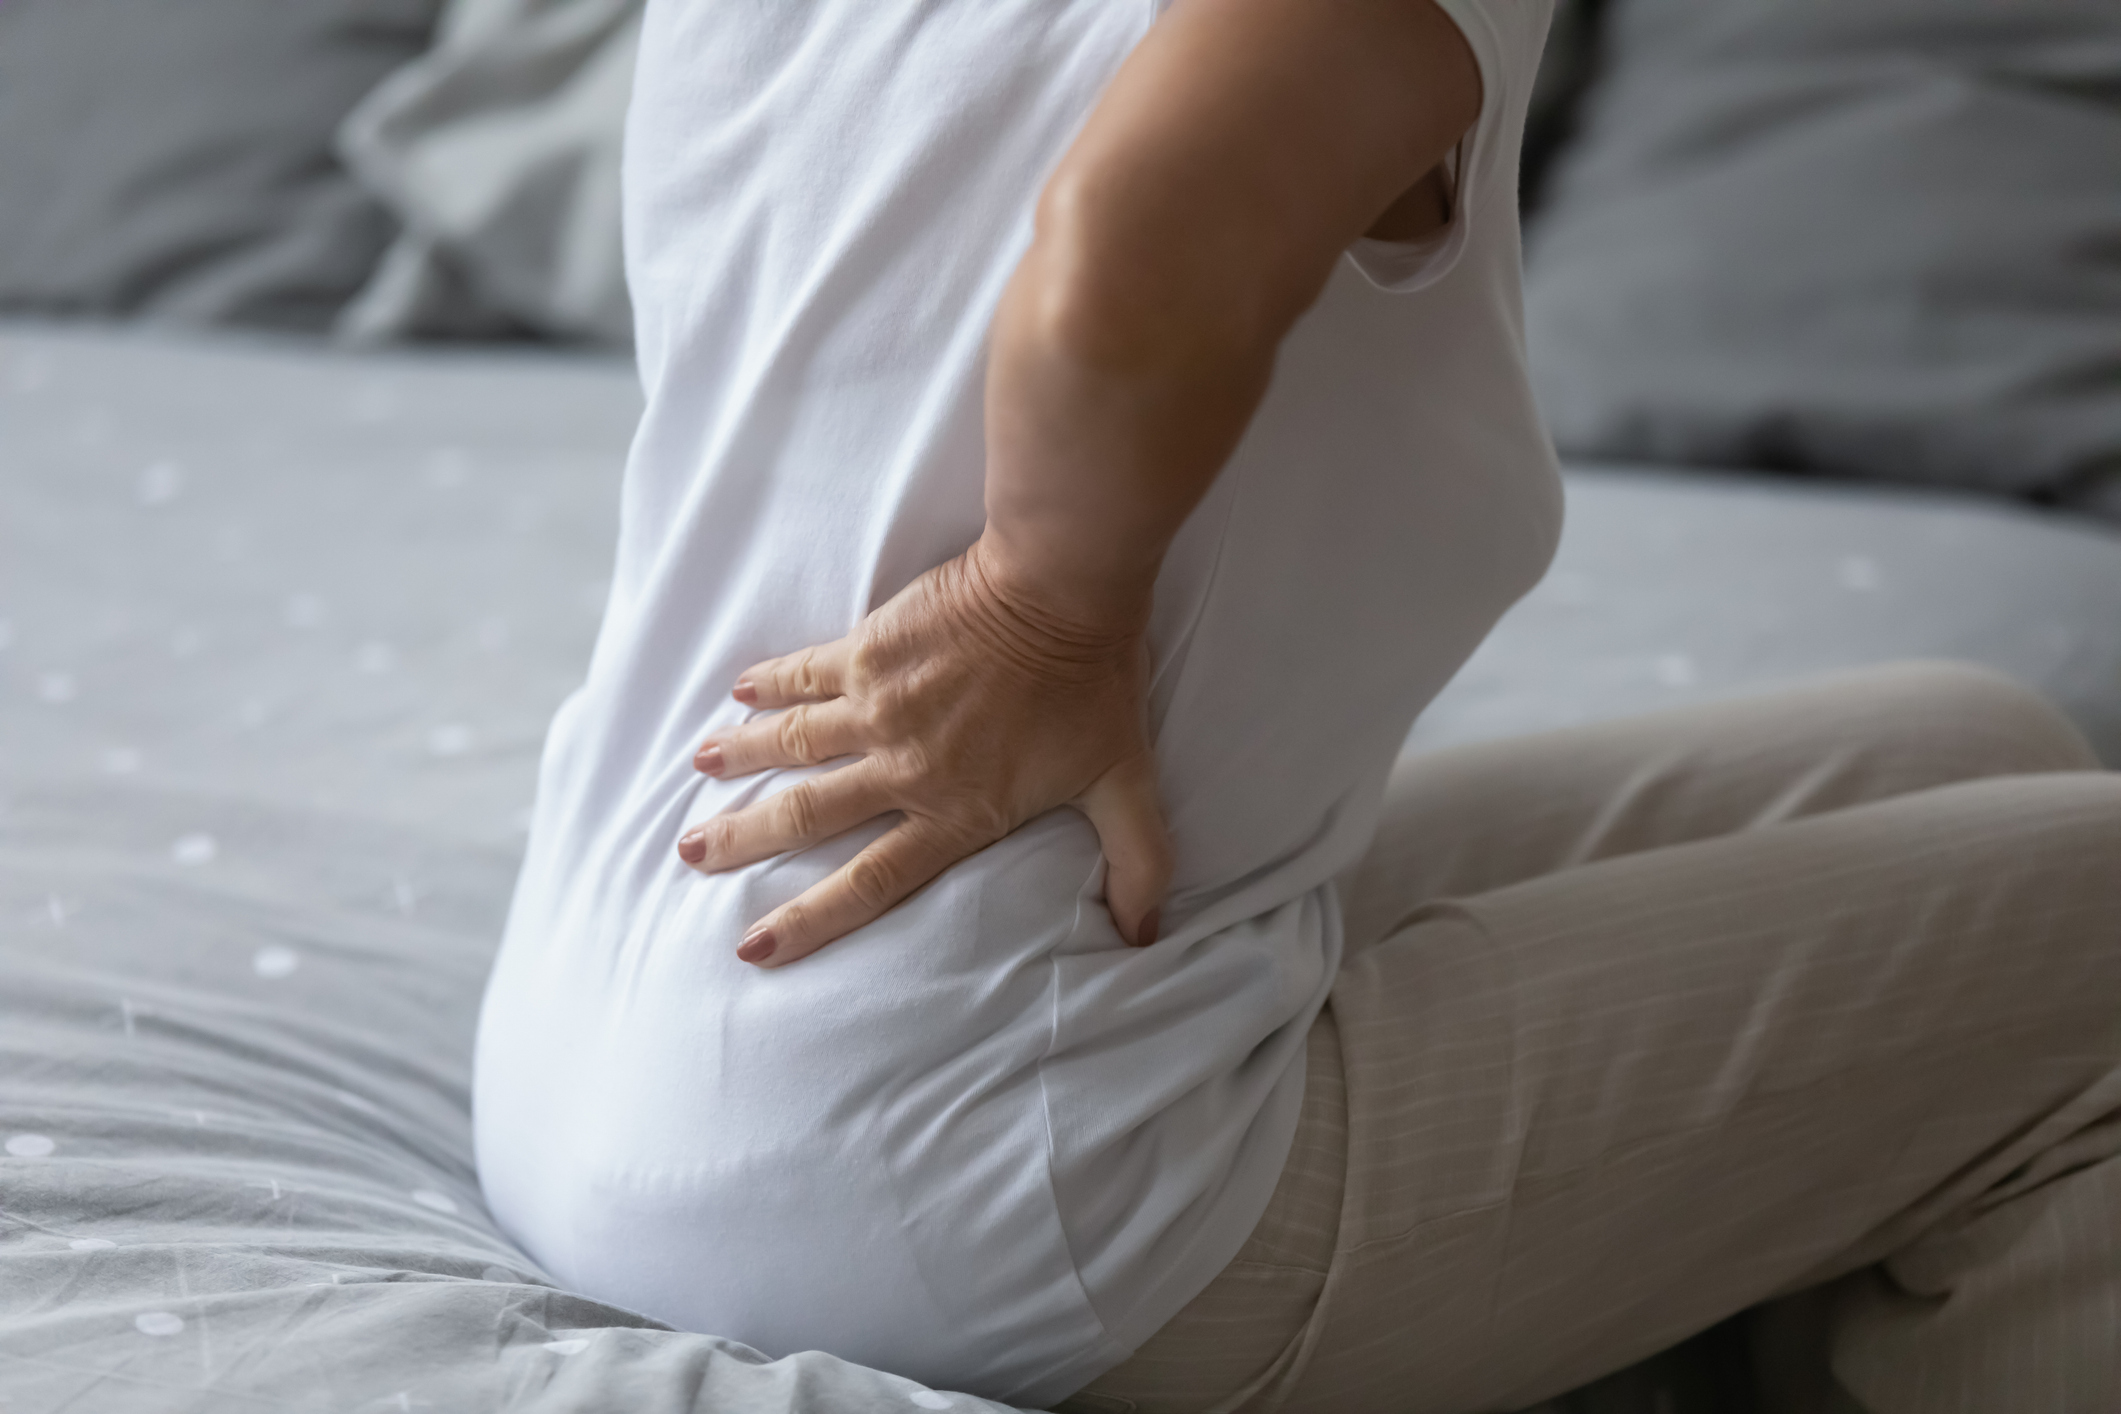 Is your back pain killing you?